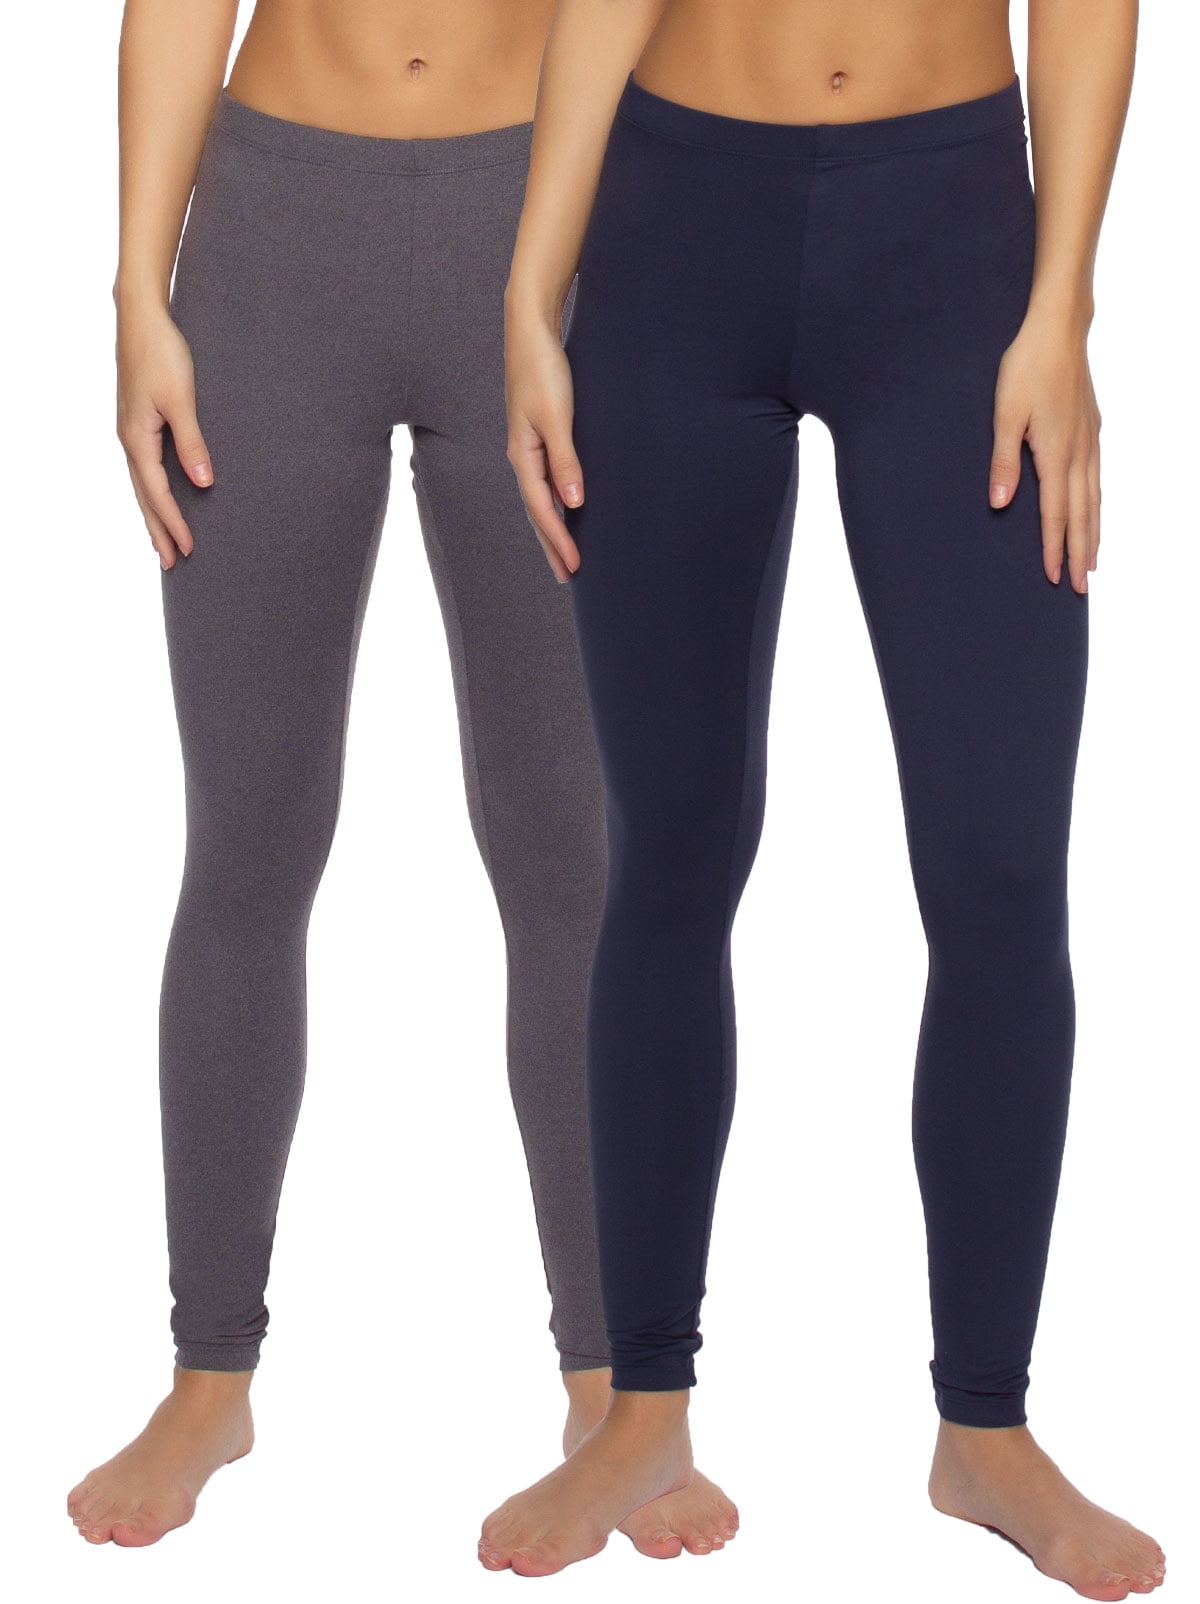 Buy aastey All Day Leggings with Pocket | Cotton Leggings | Yoga Pants |  7/8th Length at Amazon.in